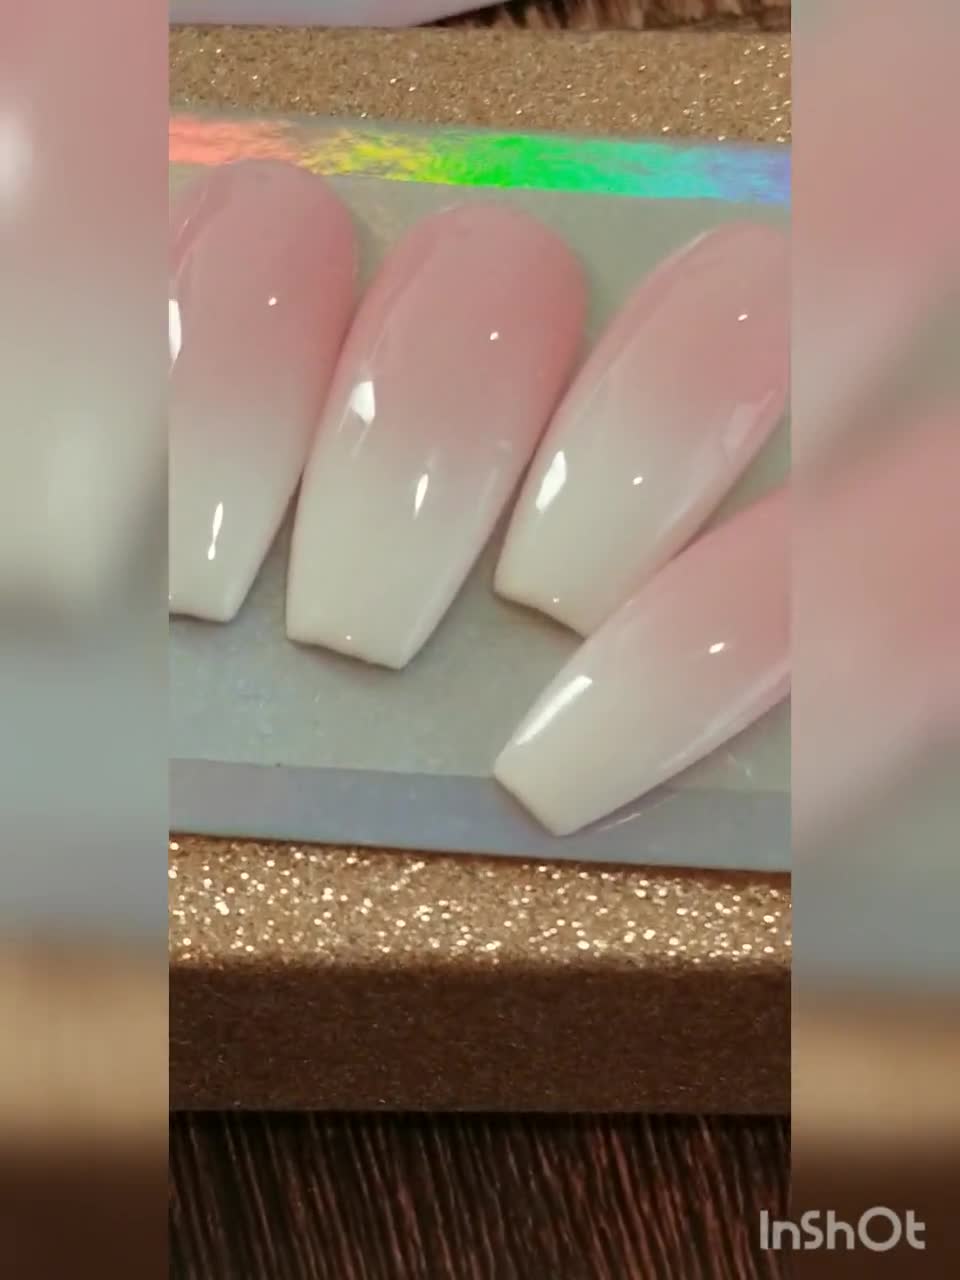 BEAUTIFUL French Nude and White Airbrushed Strong Gel Reusable Press-on  Fake Nail Tips for Best Selling Long Hard Durable Fingernails -  Sweden